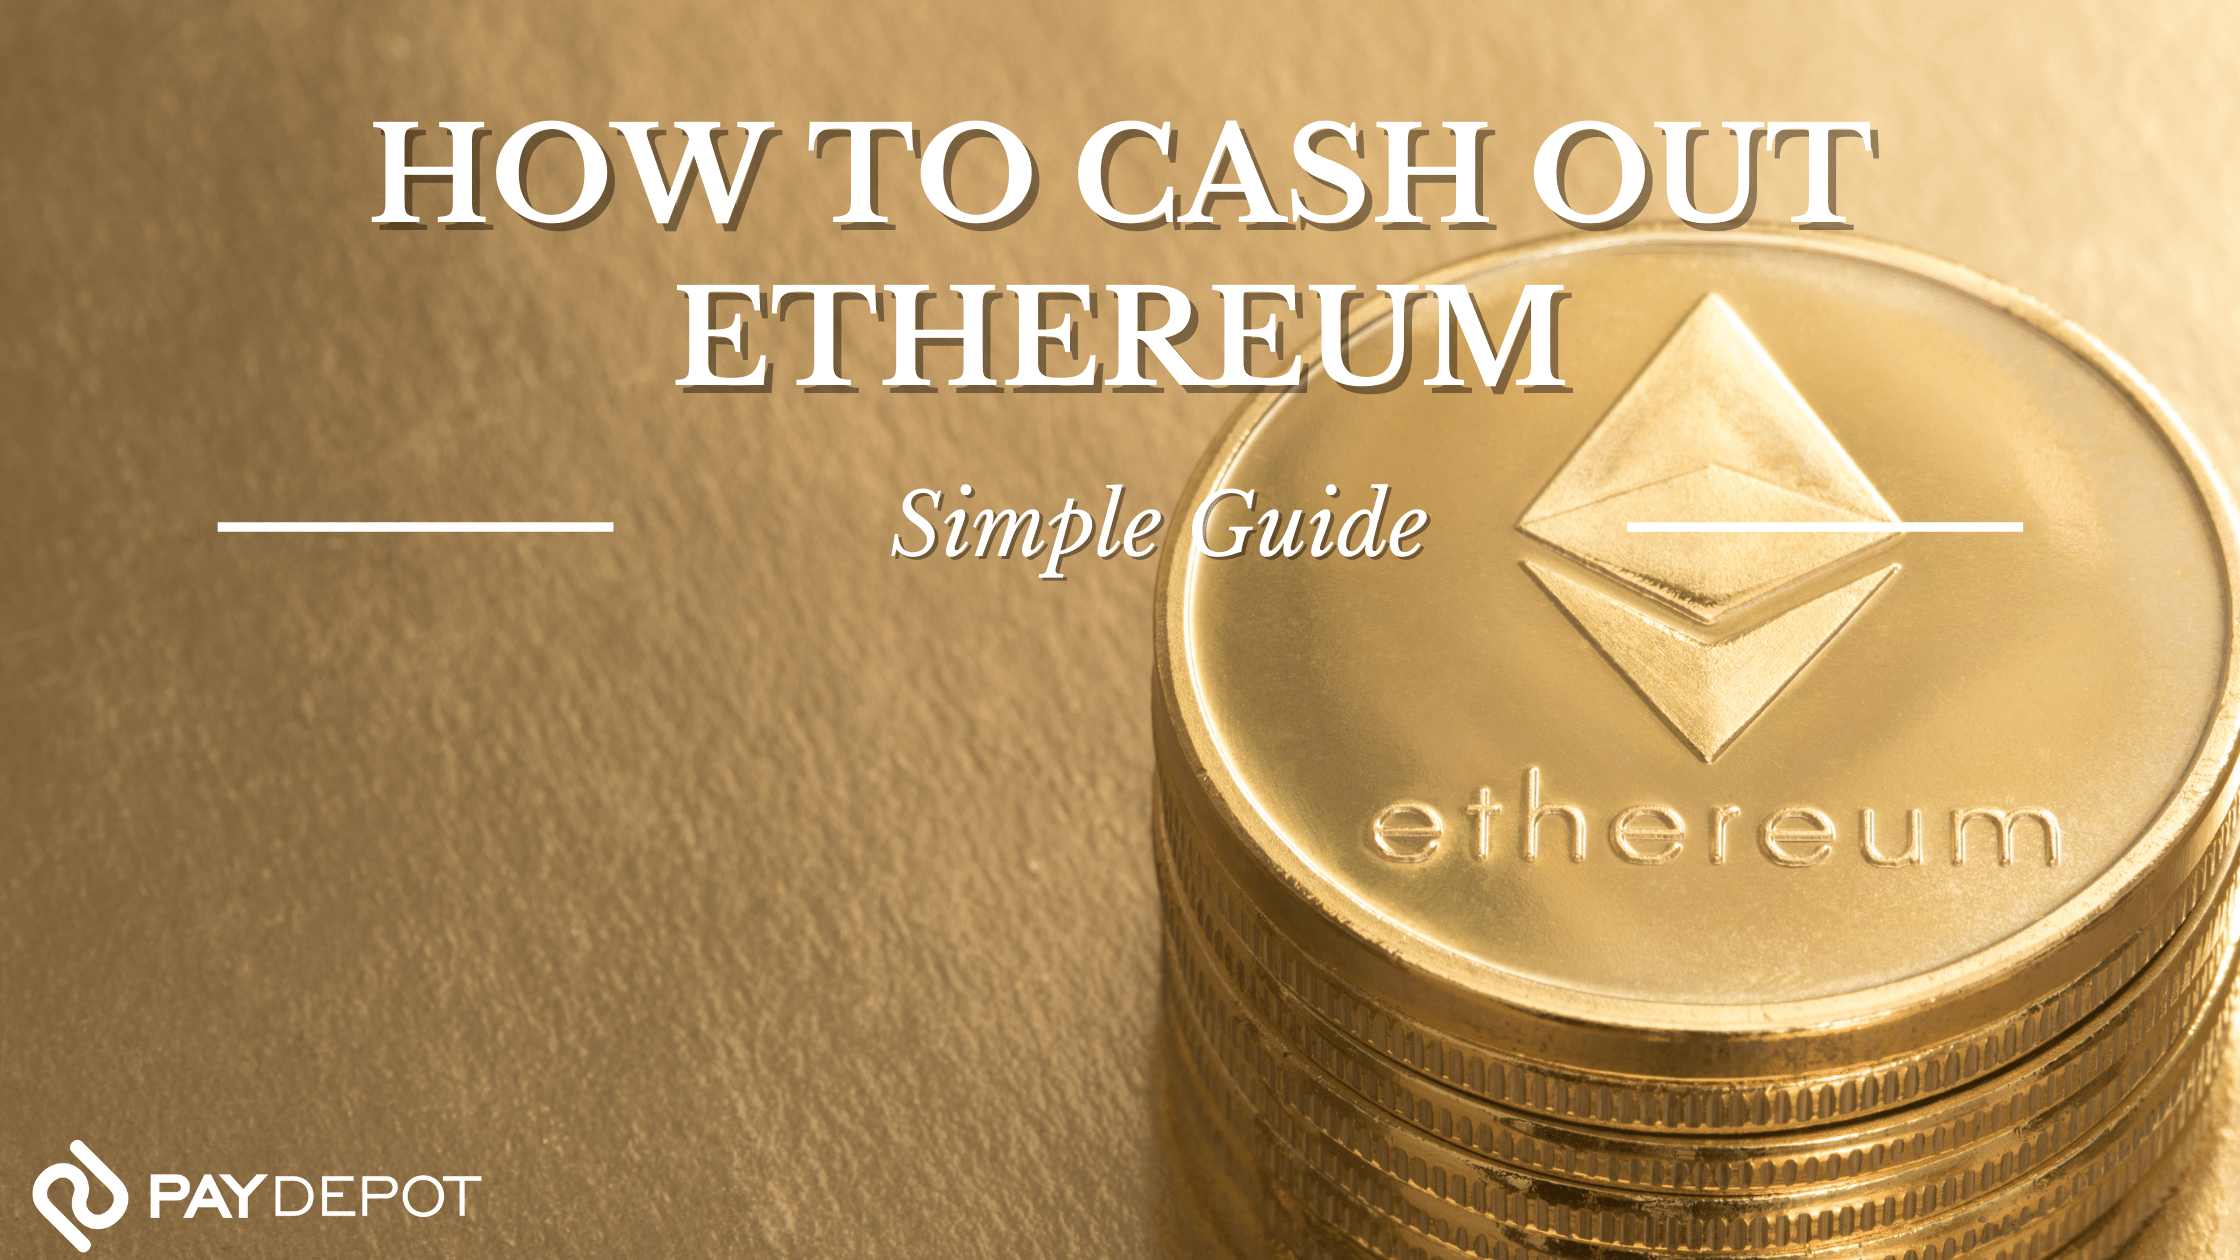 Ethereum cash out eth printing services